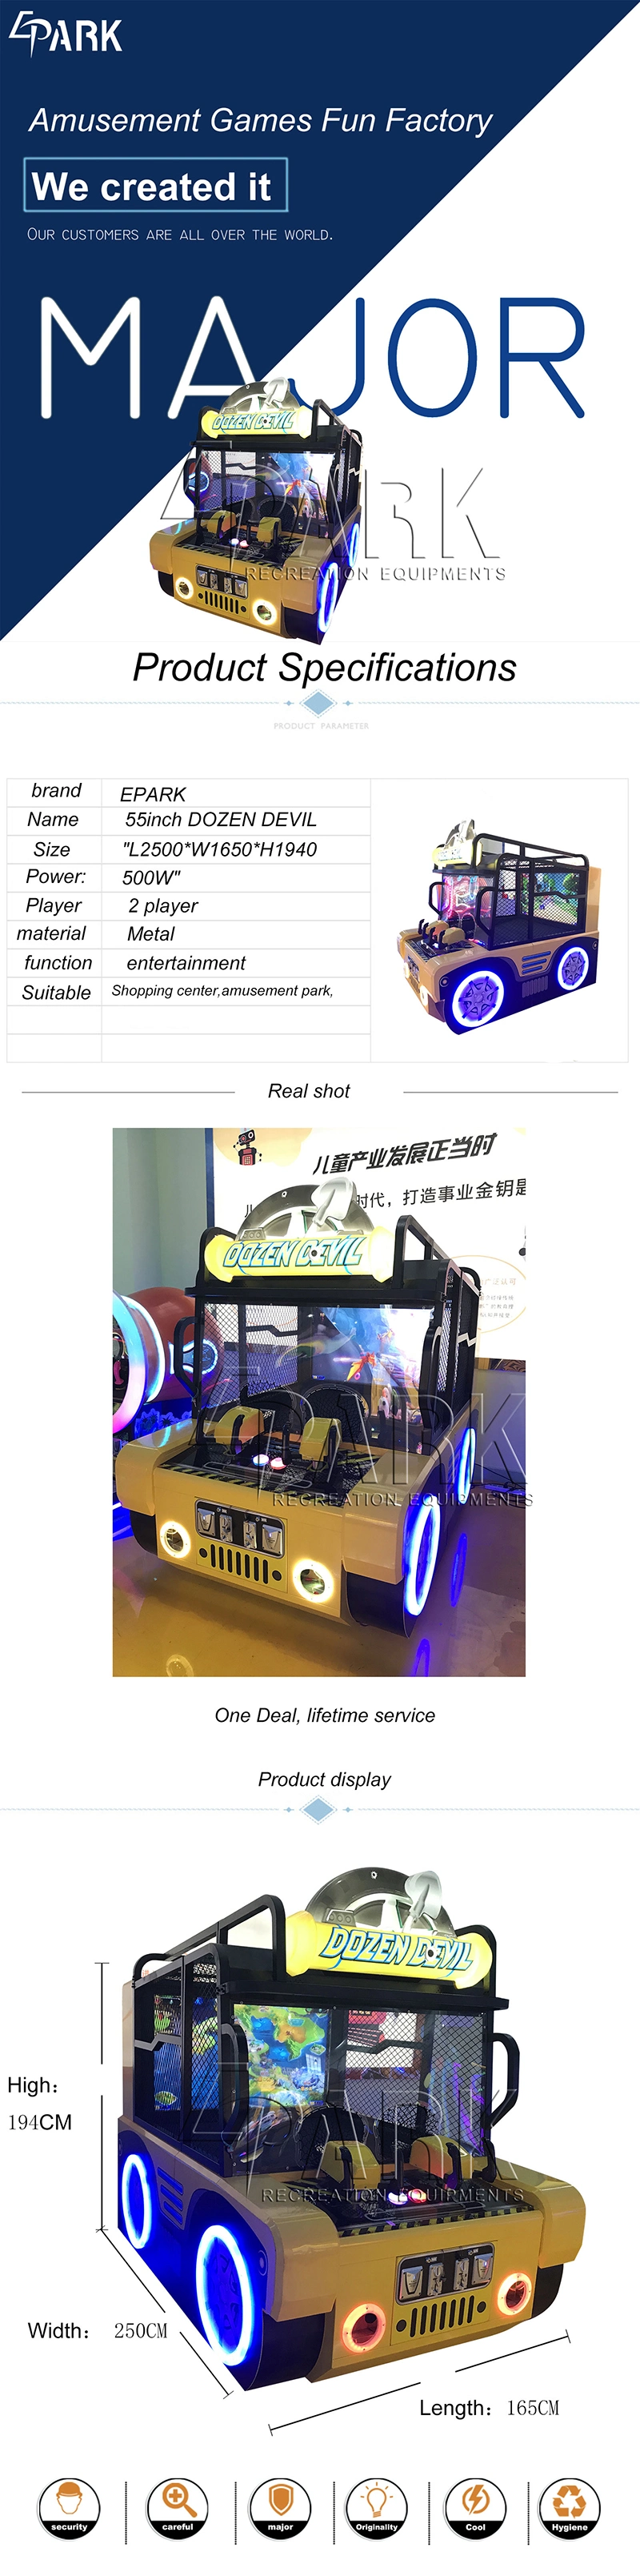 55 Inch Dozen Devil Shooting Ball Machine Two Player Cooperated Shooting Video Game Machine